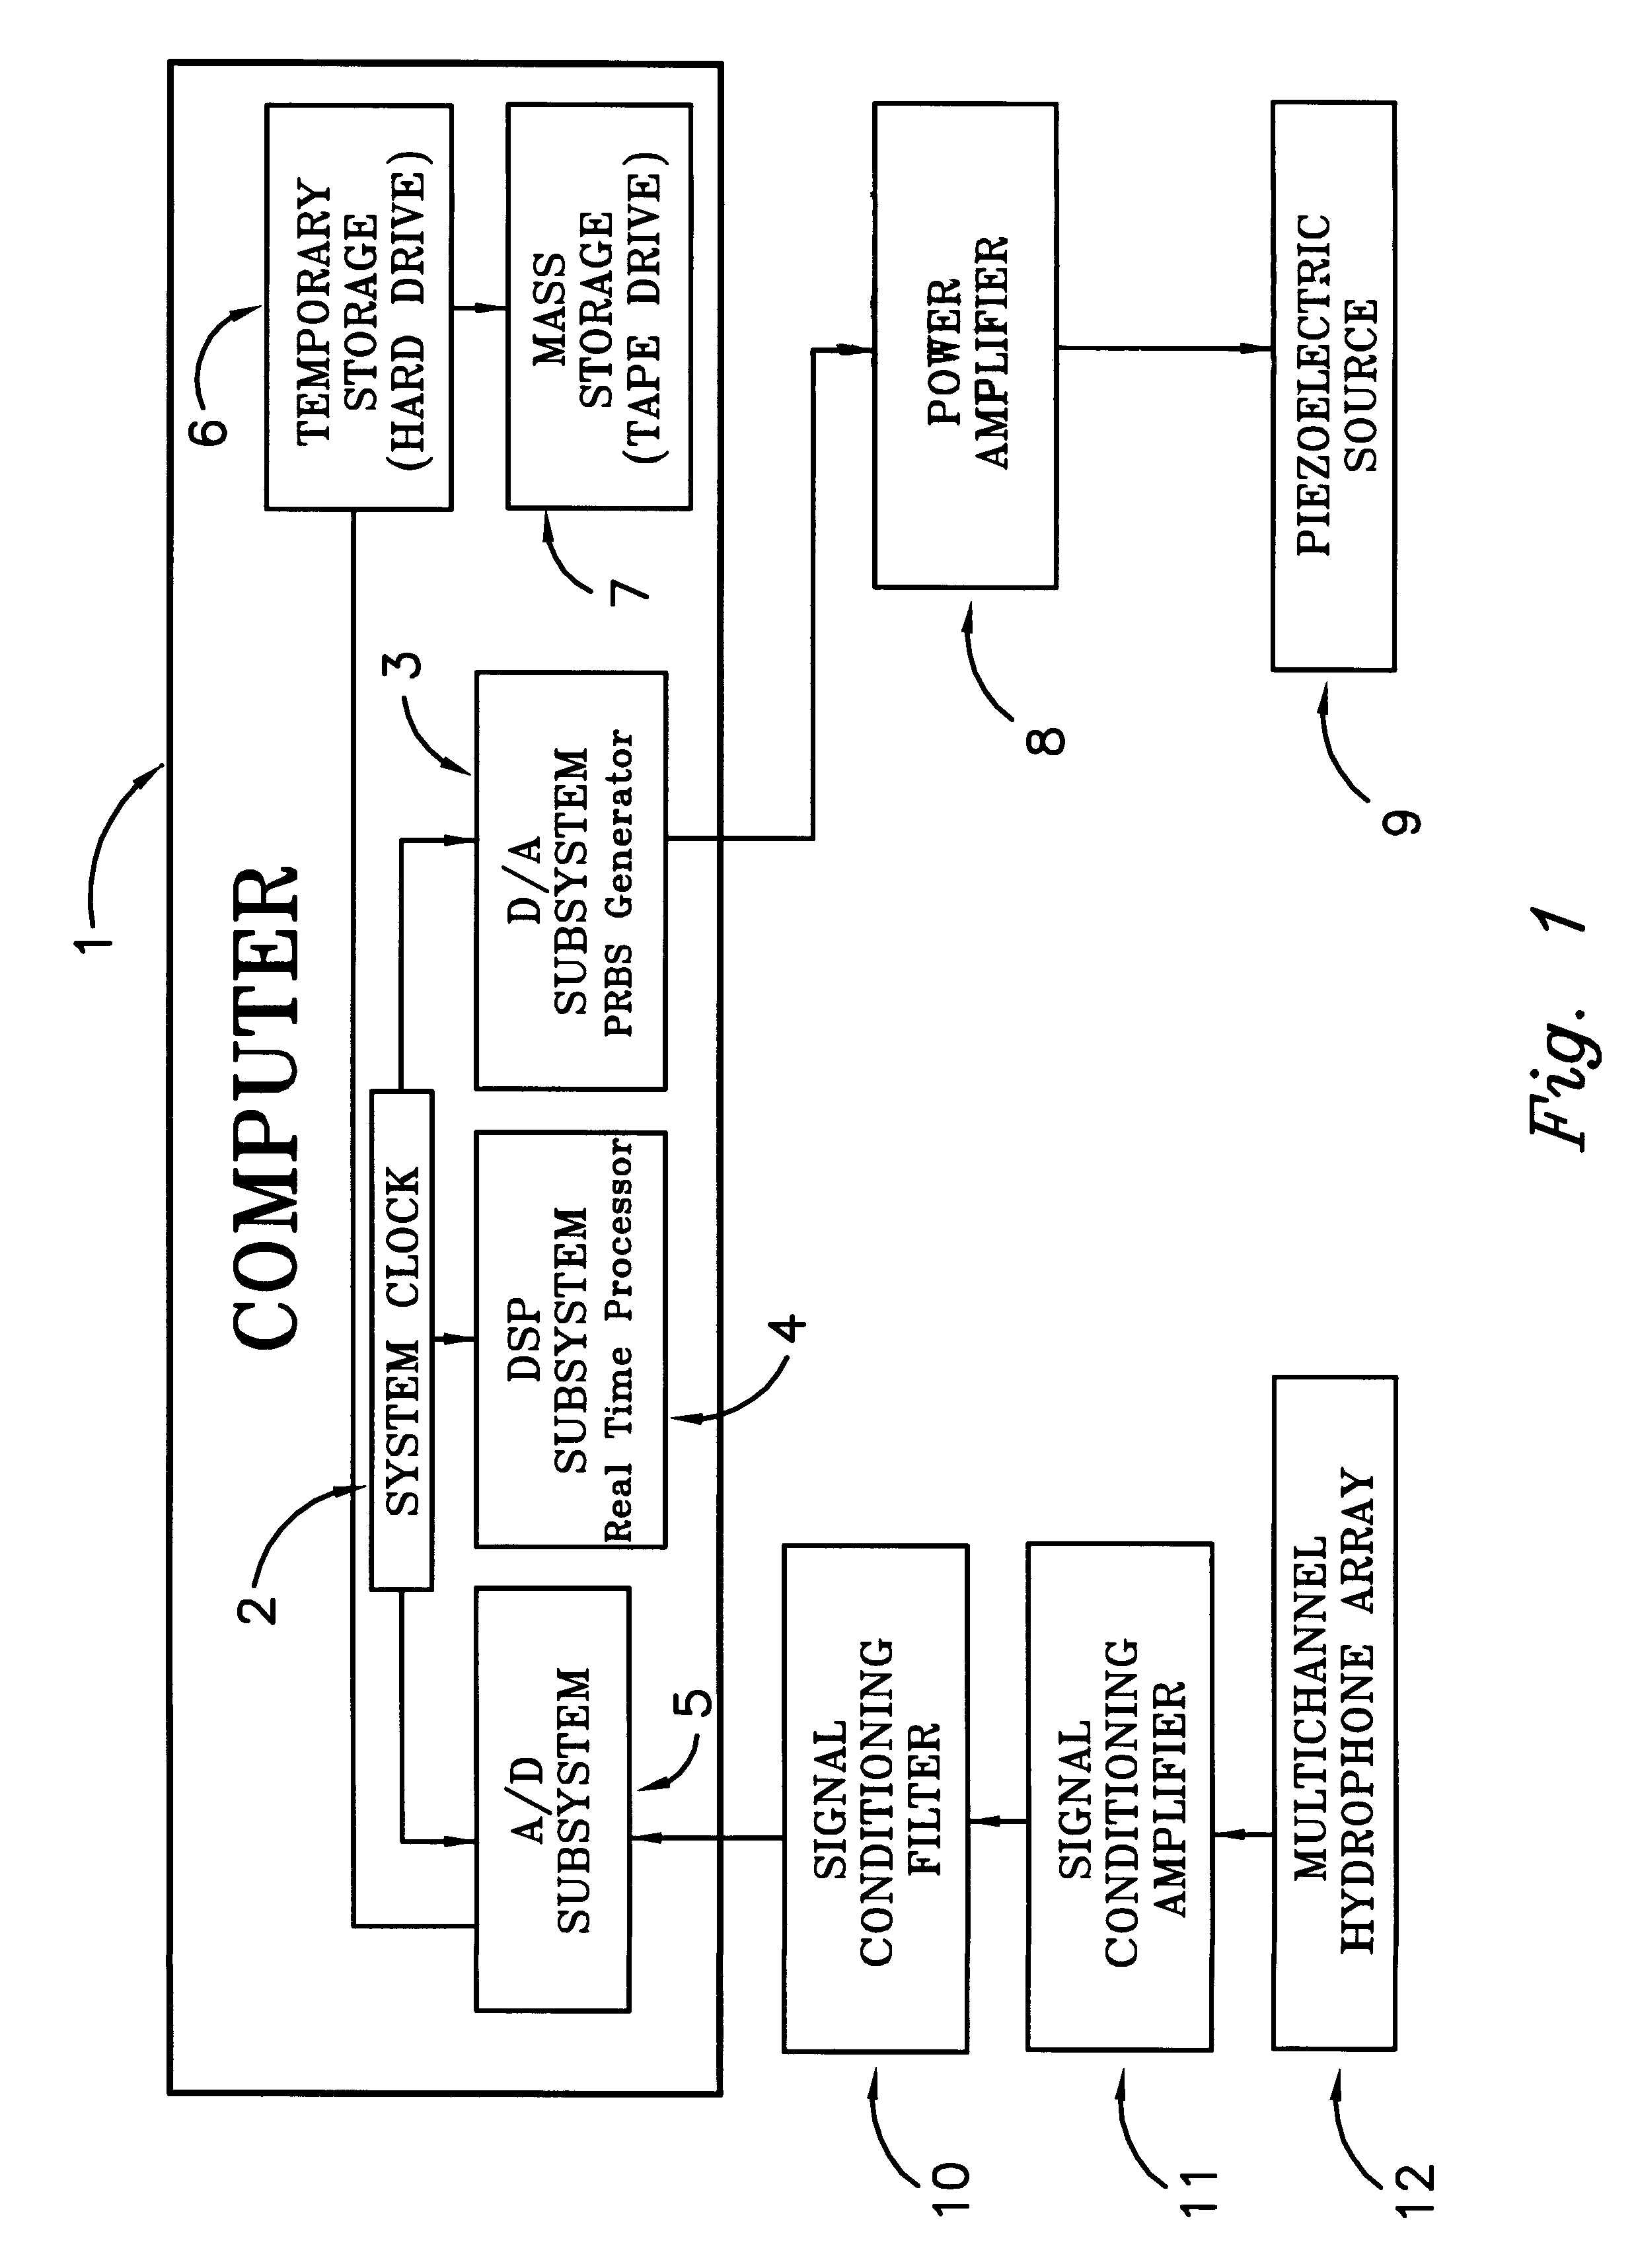 Method of imaging the permeability and fluid content structure within sediment